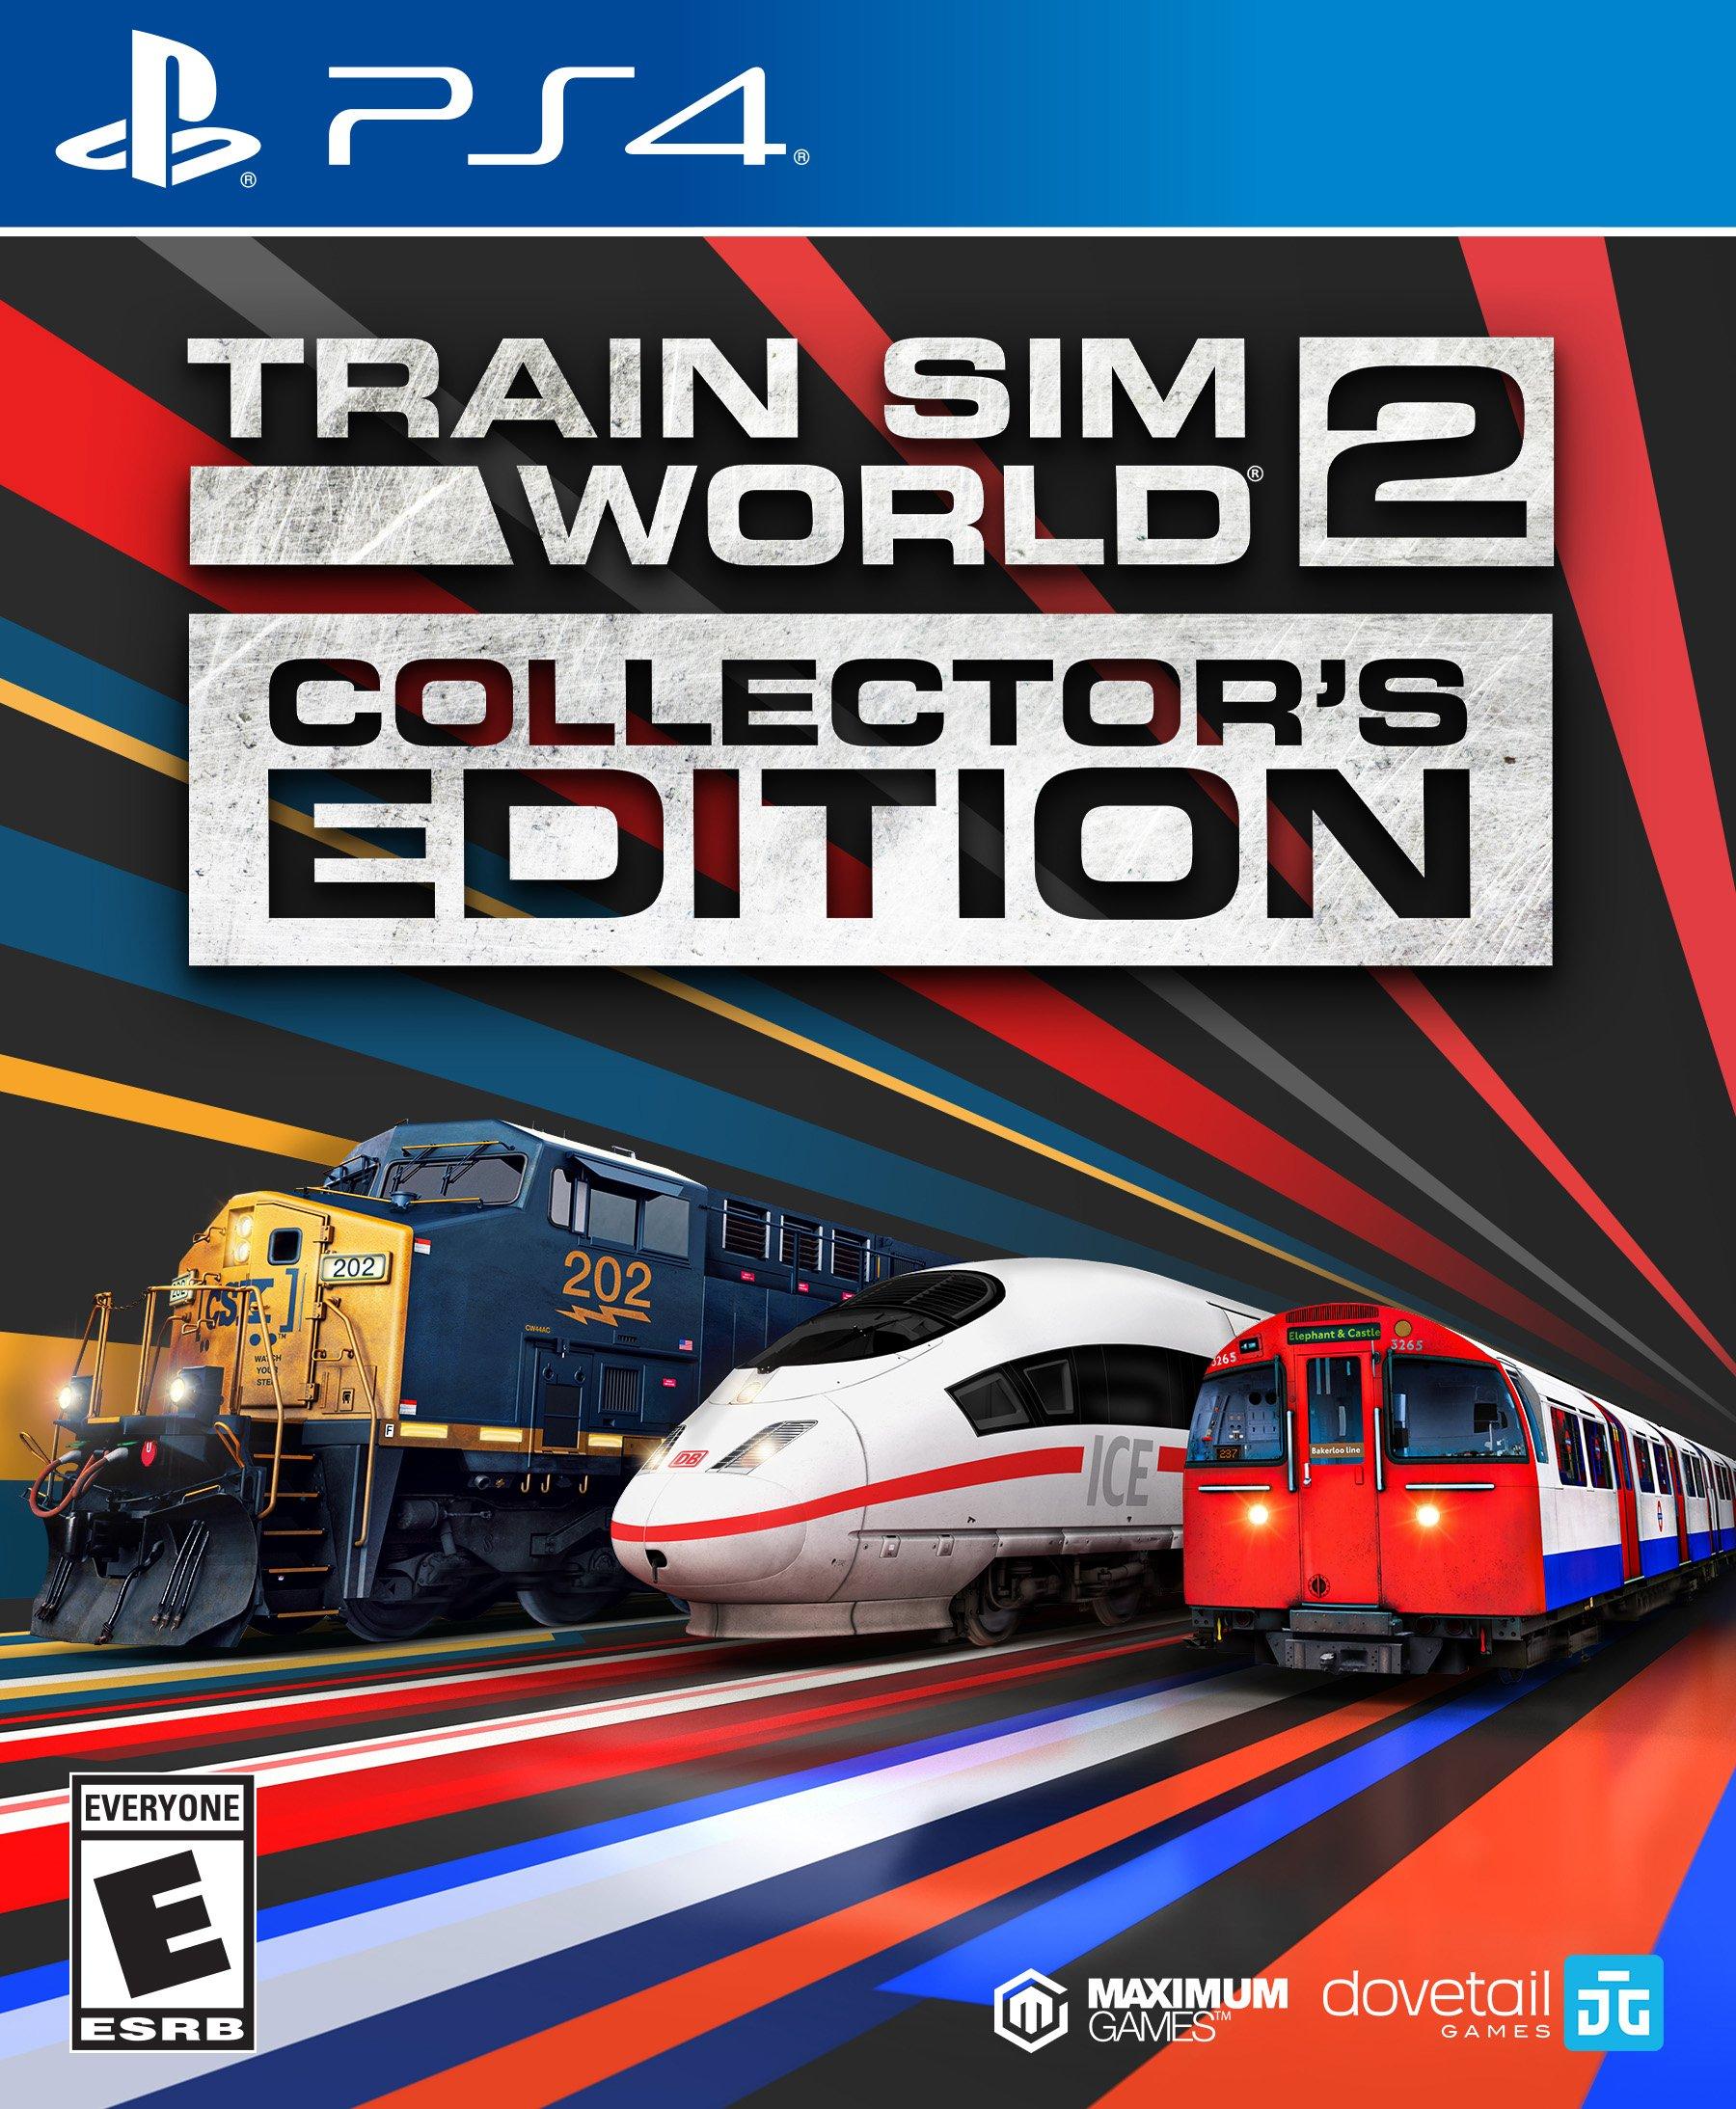 Train Sim World 2: Collector's Edition - PlayStation 4, Pre-Owned -  Maximum Games